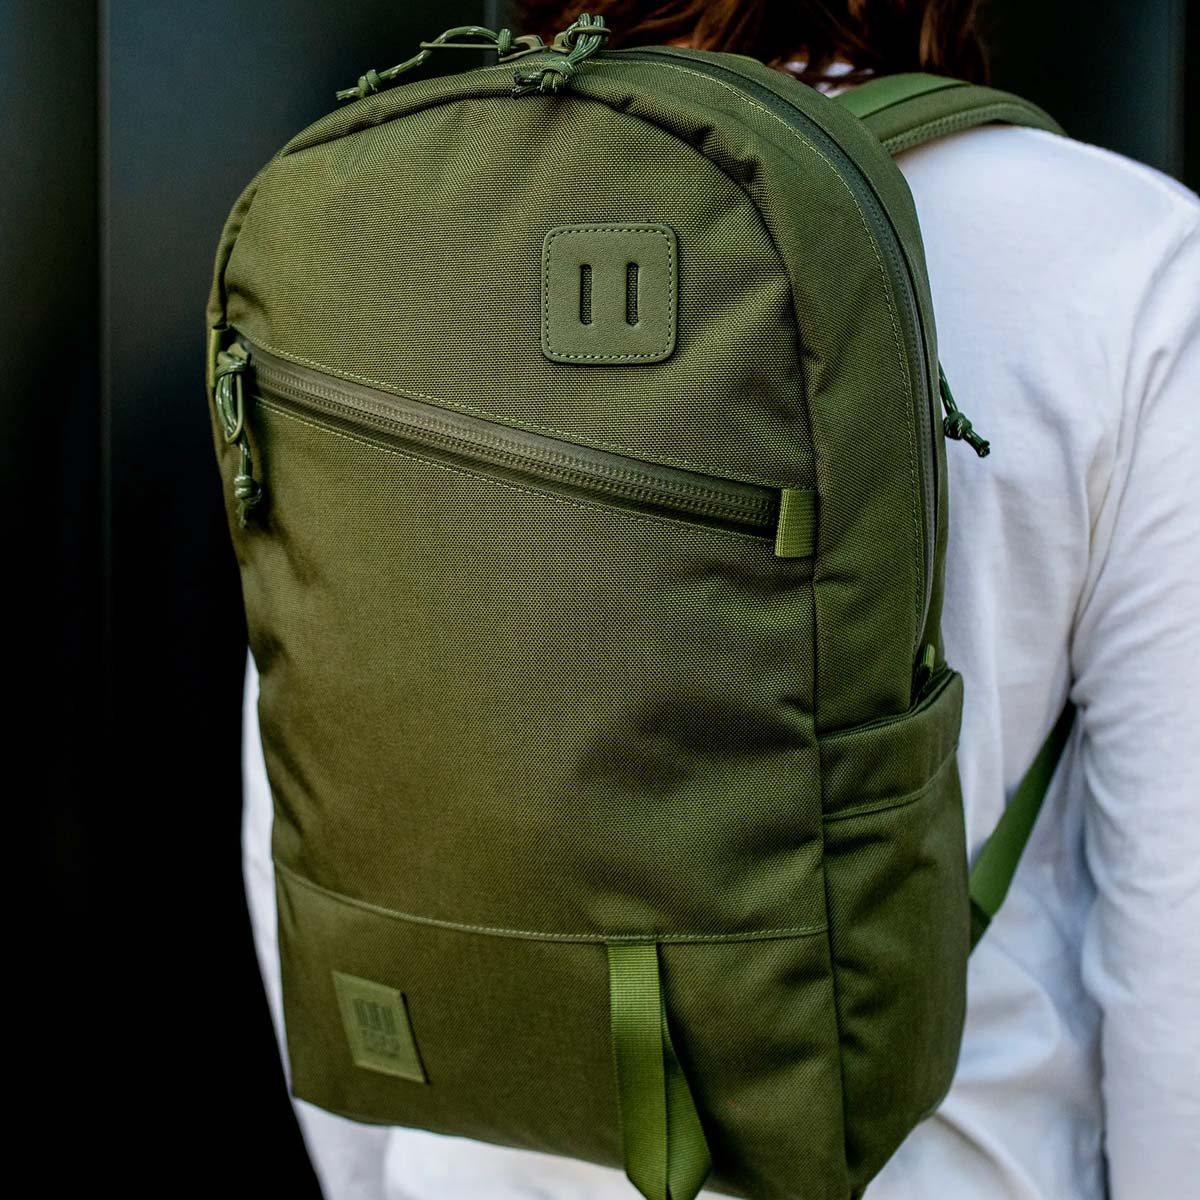 Topo Designs Daypack Tech, it’s great as an everyday work bag, yet it has enough room for extra layers on the trail